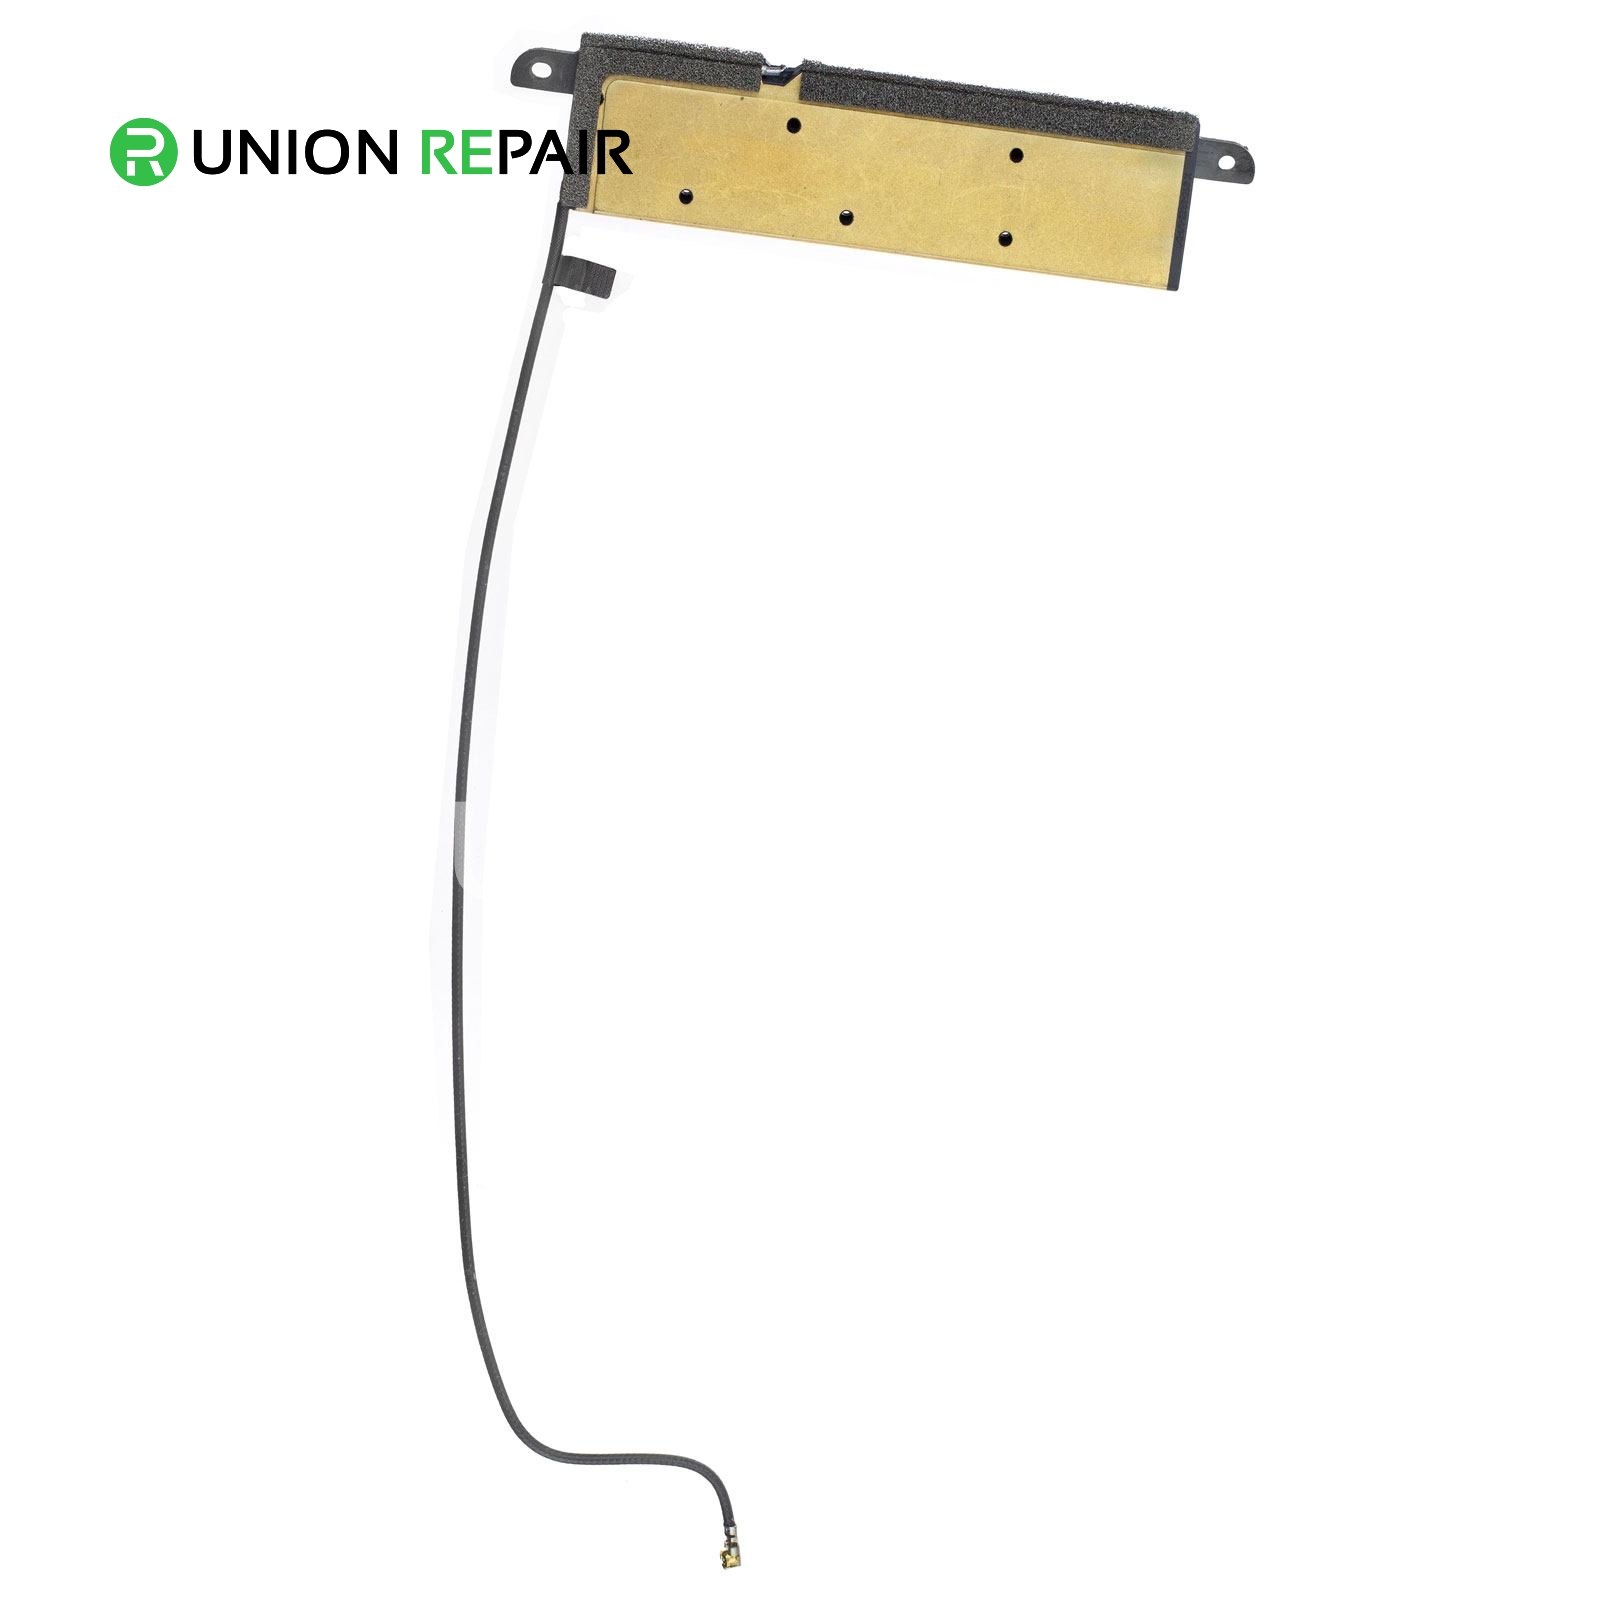 Upper Bluetooth Antenna for iMac 27" A1419 (Late 2012, Mid 2015)